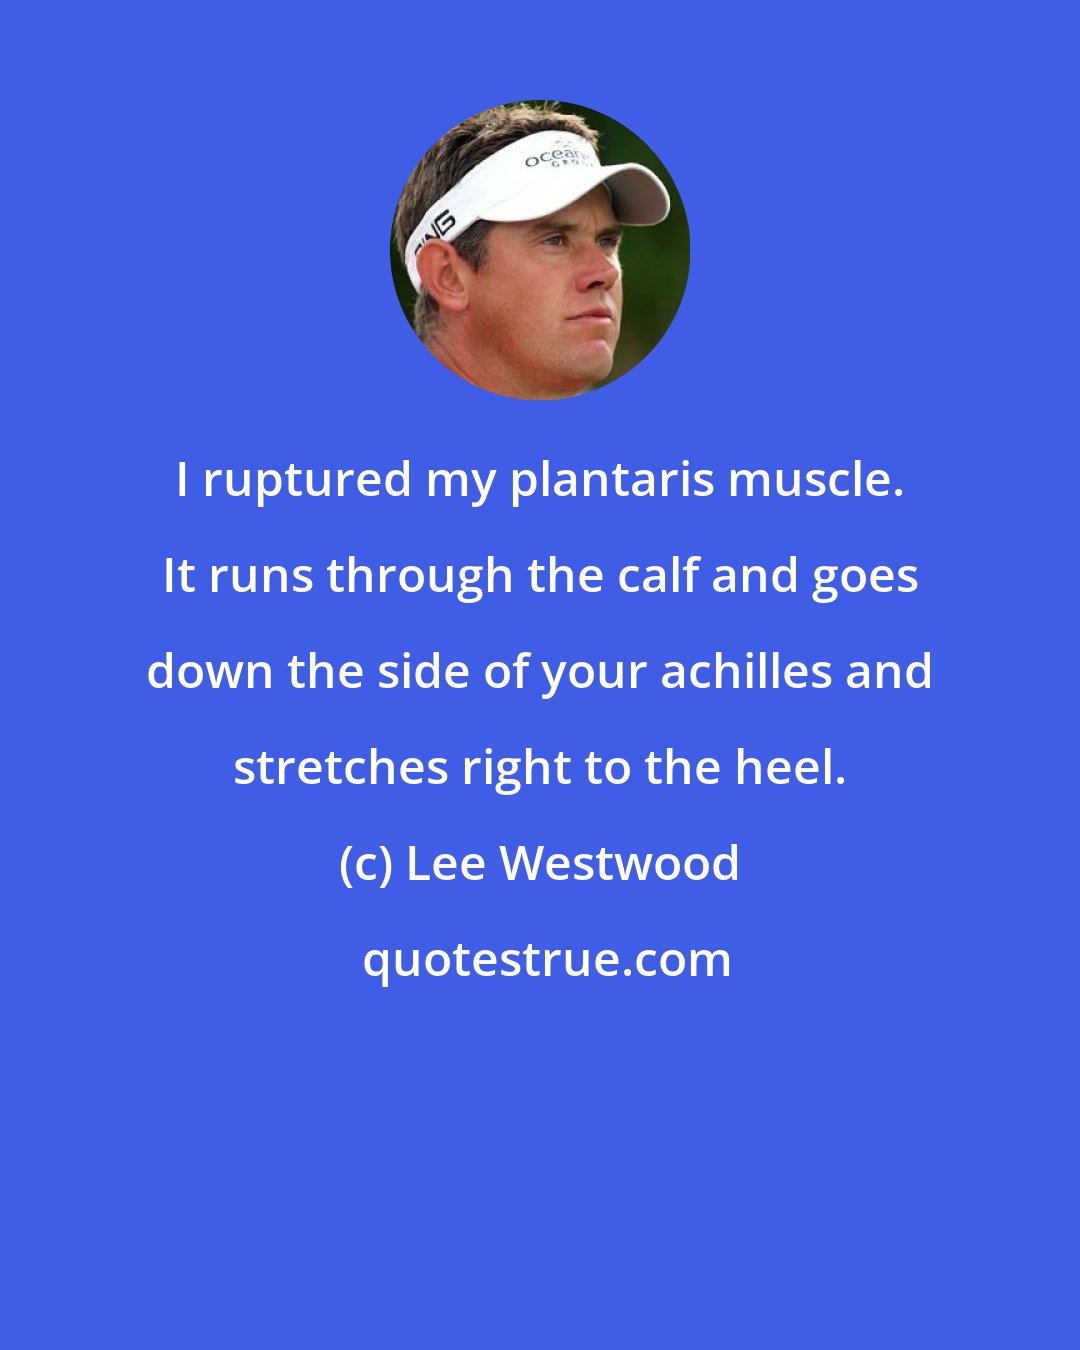 Lee Westwood: I ruptured my plantaris muscle. It runs through the calf and goes down the side of your achilles and stretches right to the heel.